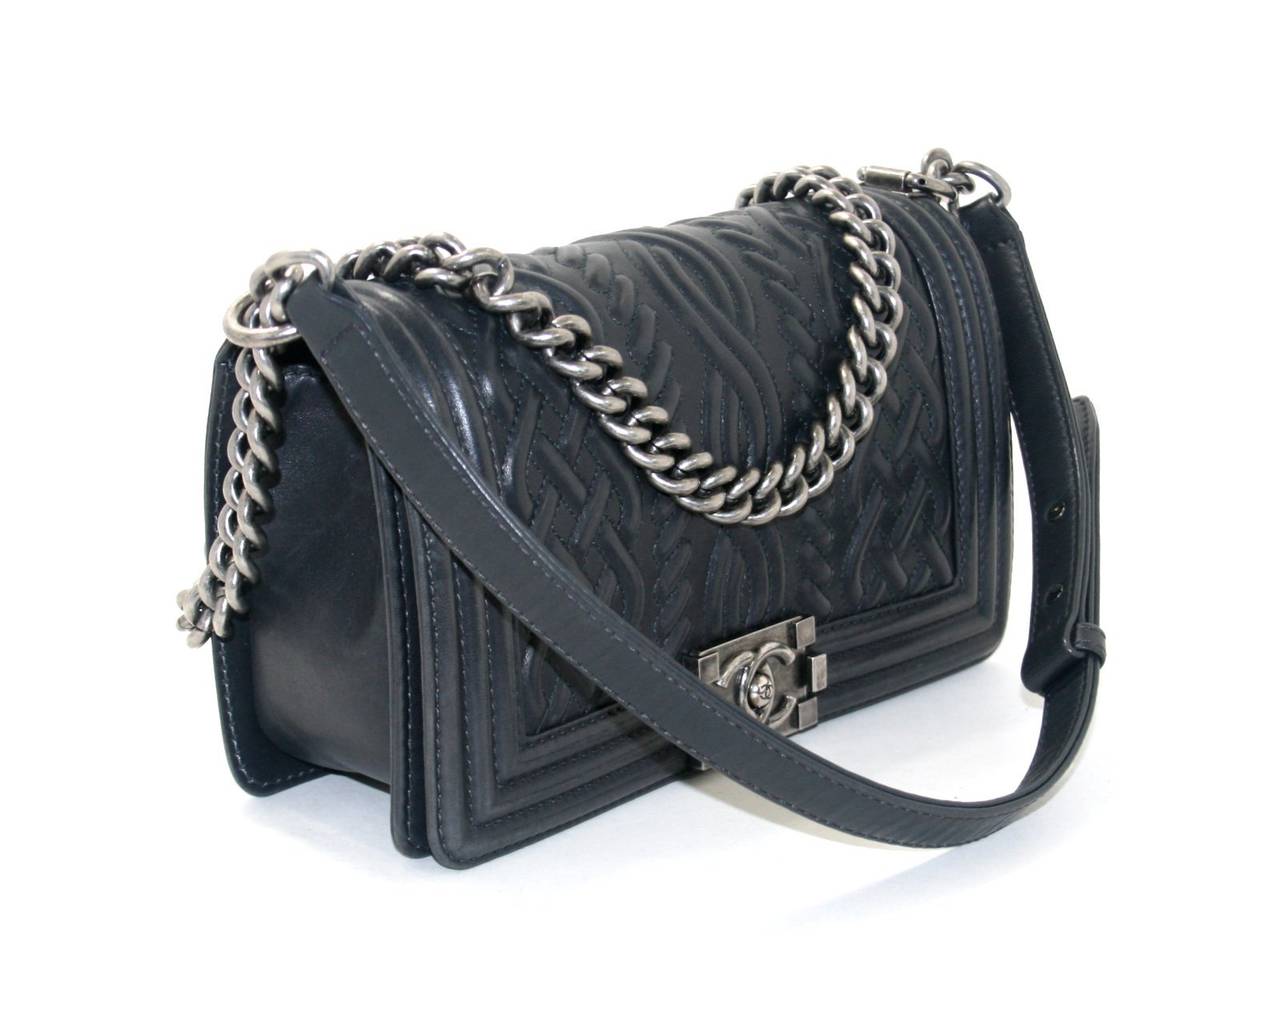 Chanel’s Charcoal Leather Medium Celtic Boy Bag is a rare piece in mint condition from the Pre Fall 2013 collection. It features a raised Celtic cabled knit design on the Boy Bag silhouette.  A very unique style, it is a must have for collectors